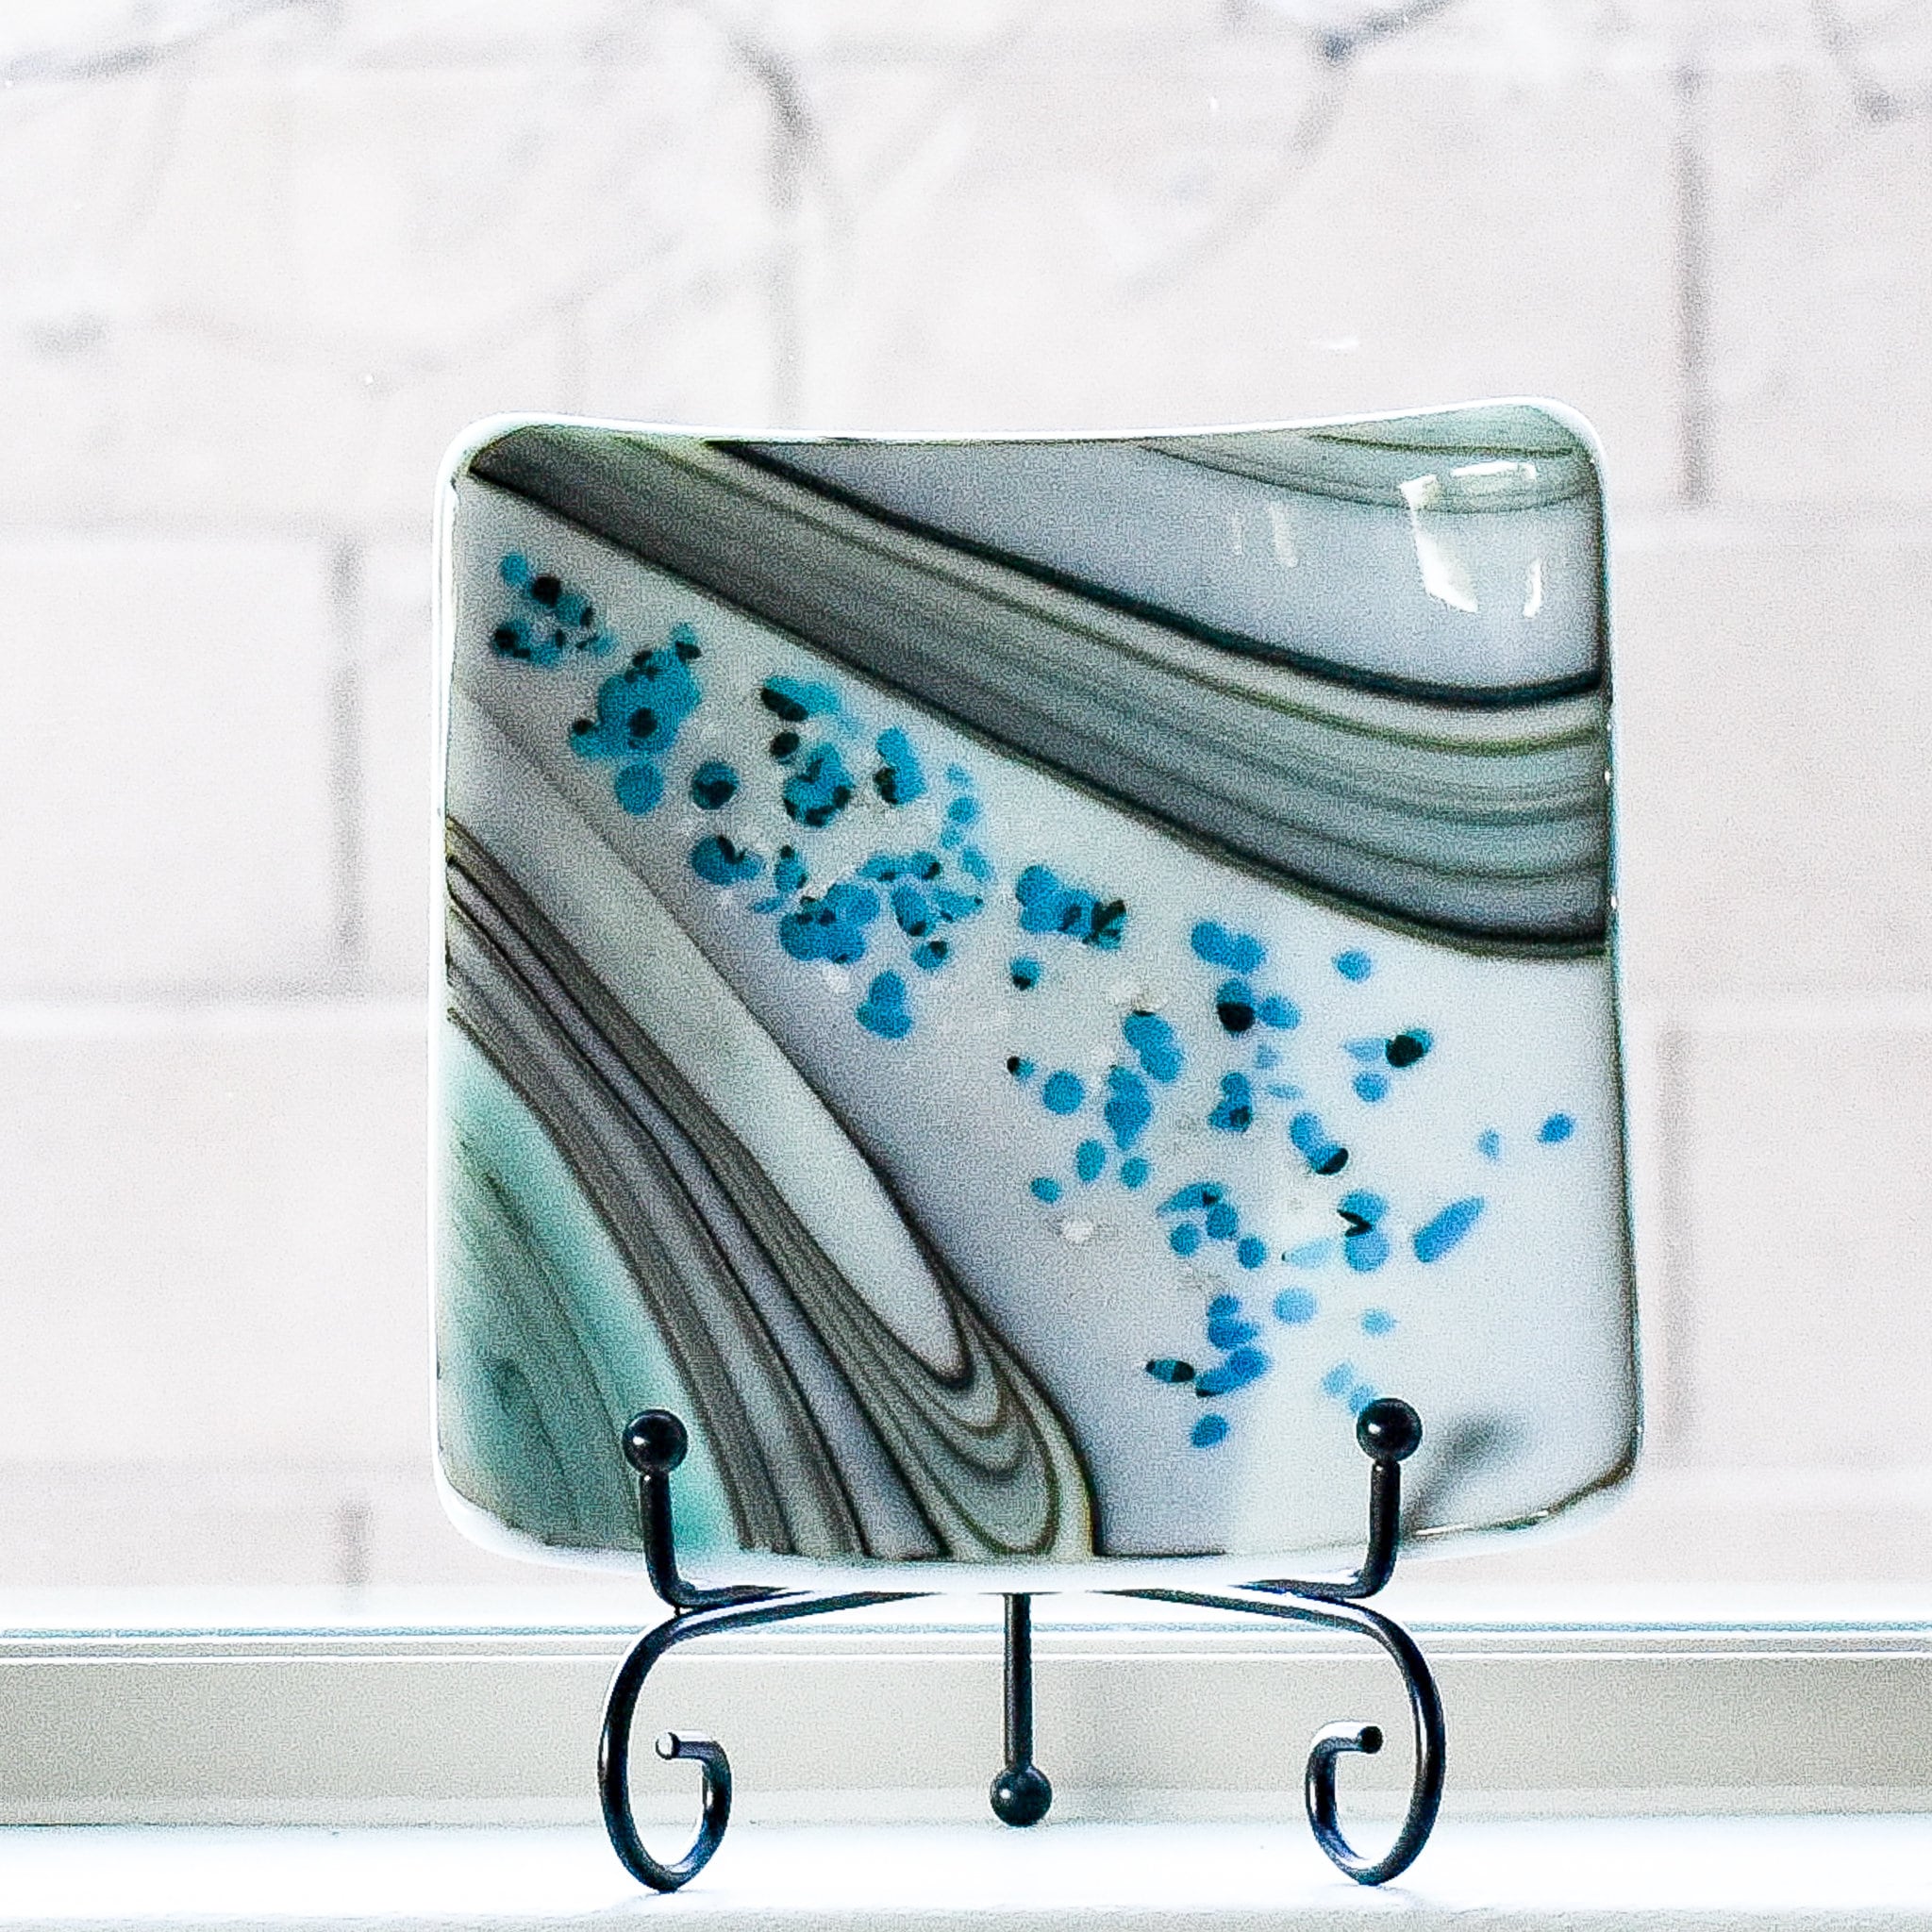 Small Contemporary Fused Glass Plate or Tray can be Displayed as Art or used as a Catchall Tray or Food Serving Dish